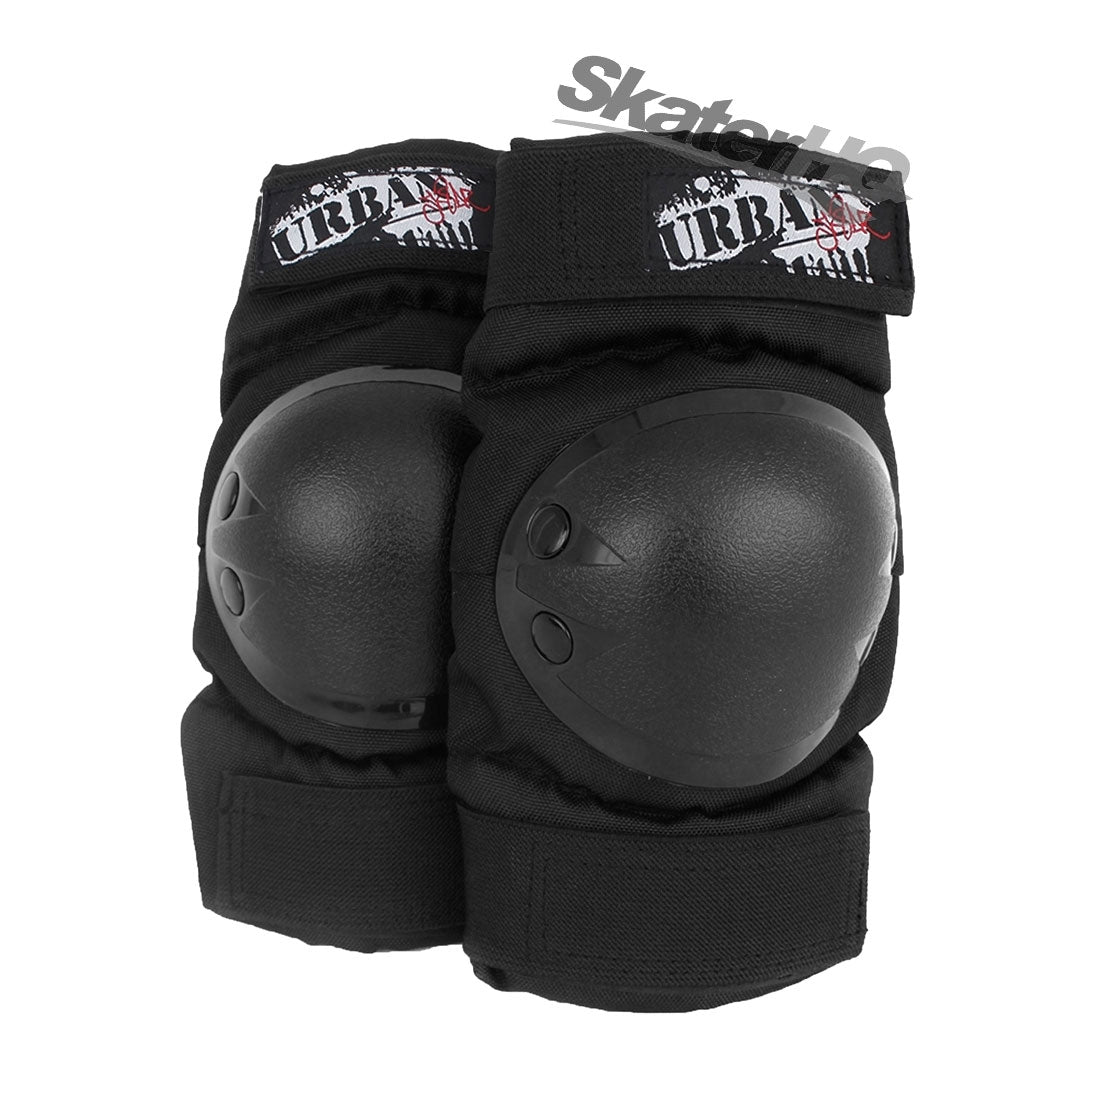 Urban Skater Knee Pads - Small Protective Gear